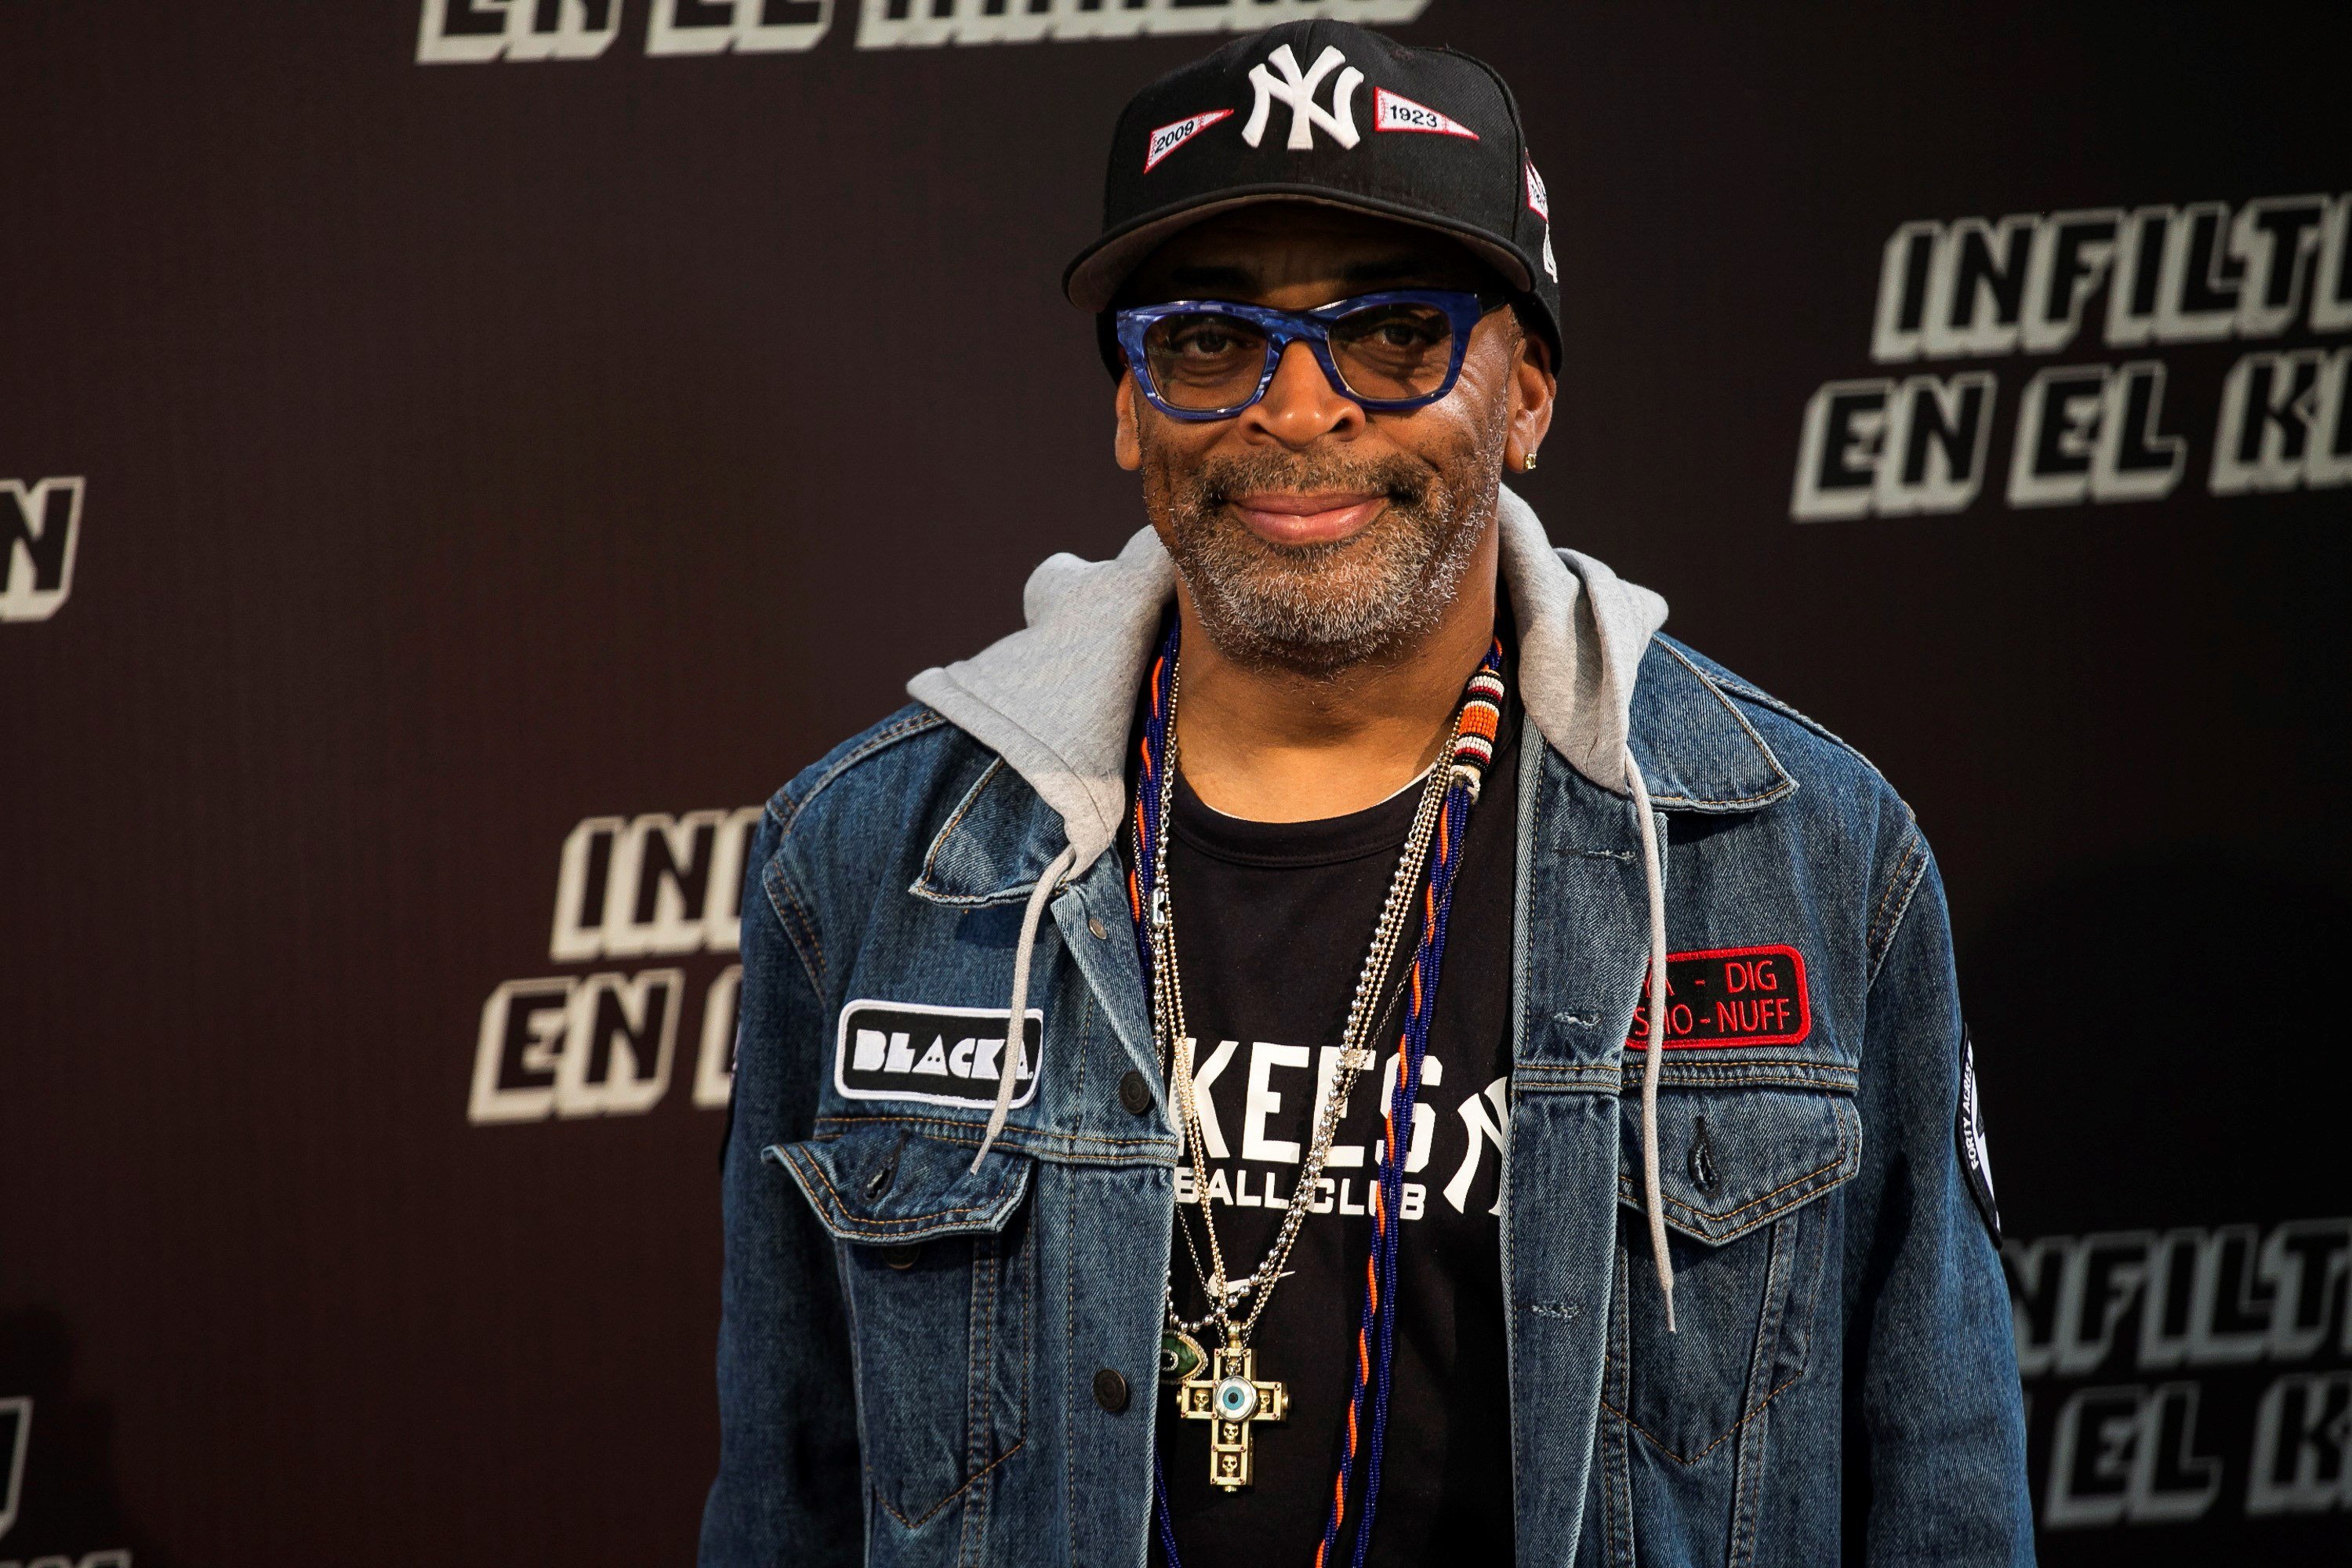 Spike Lee: "Independence for Catalonia"